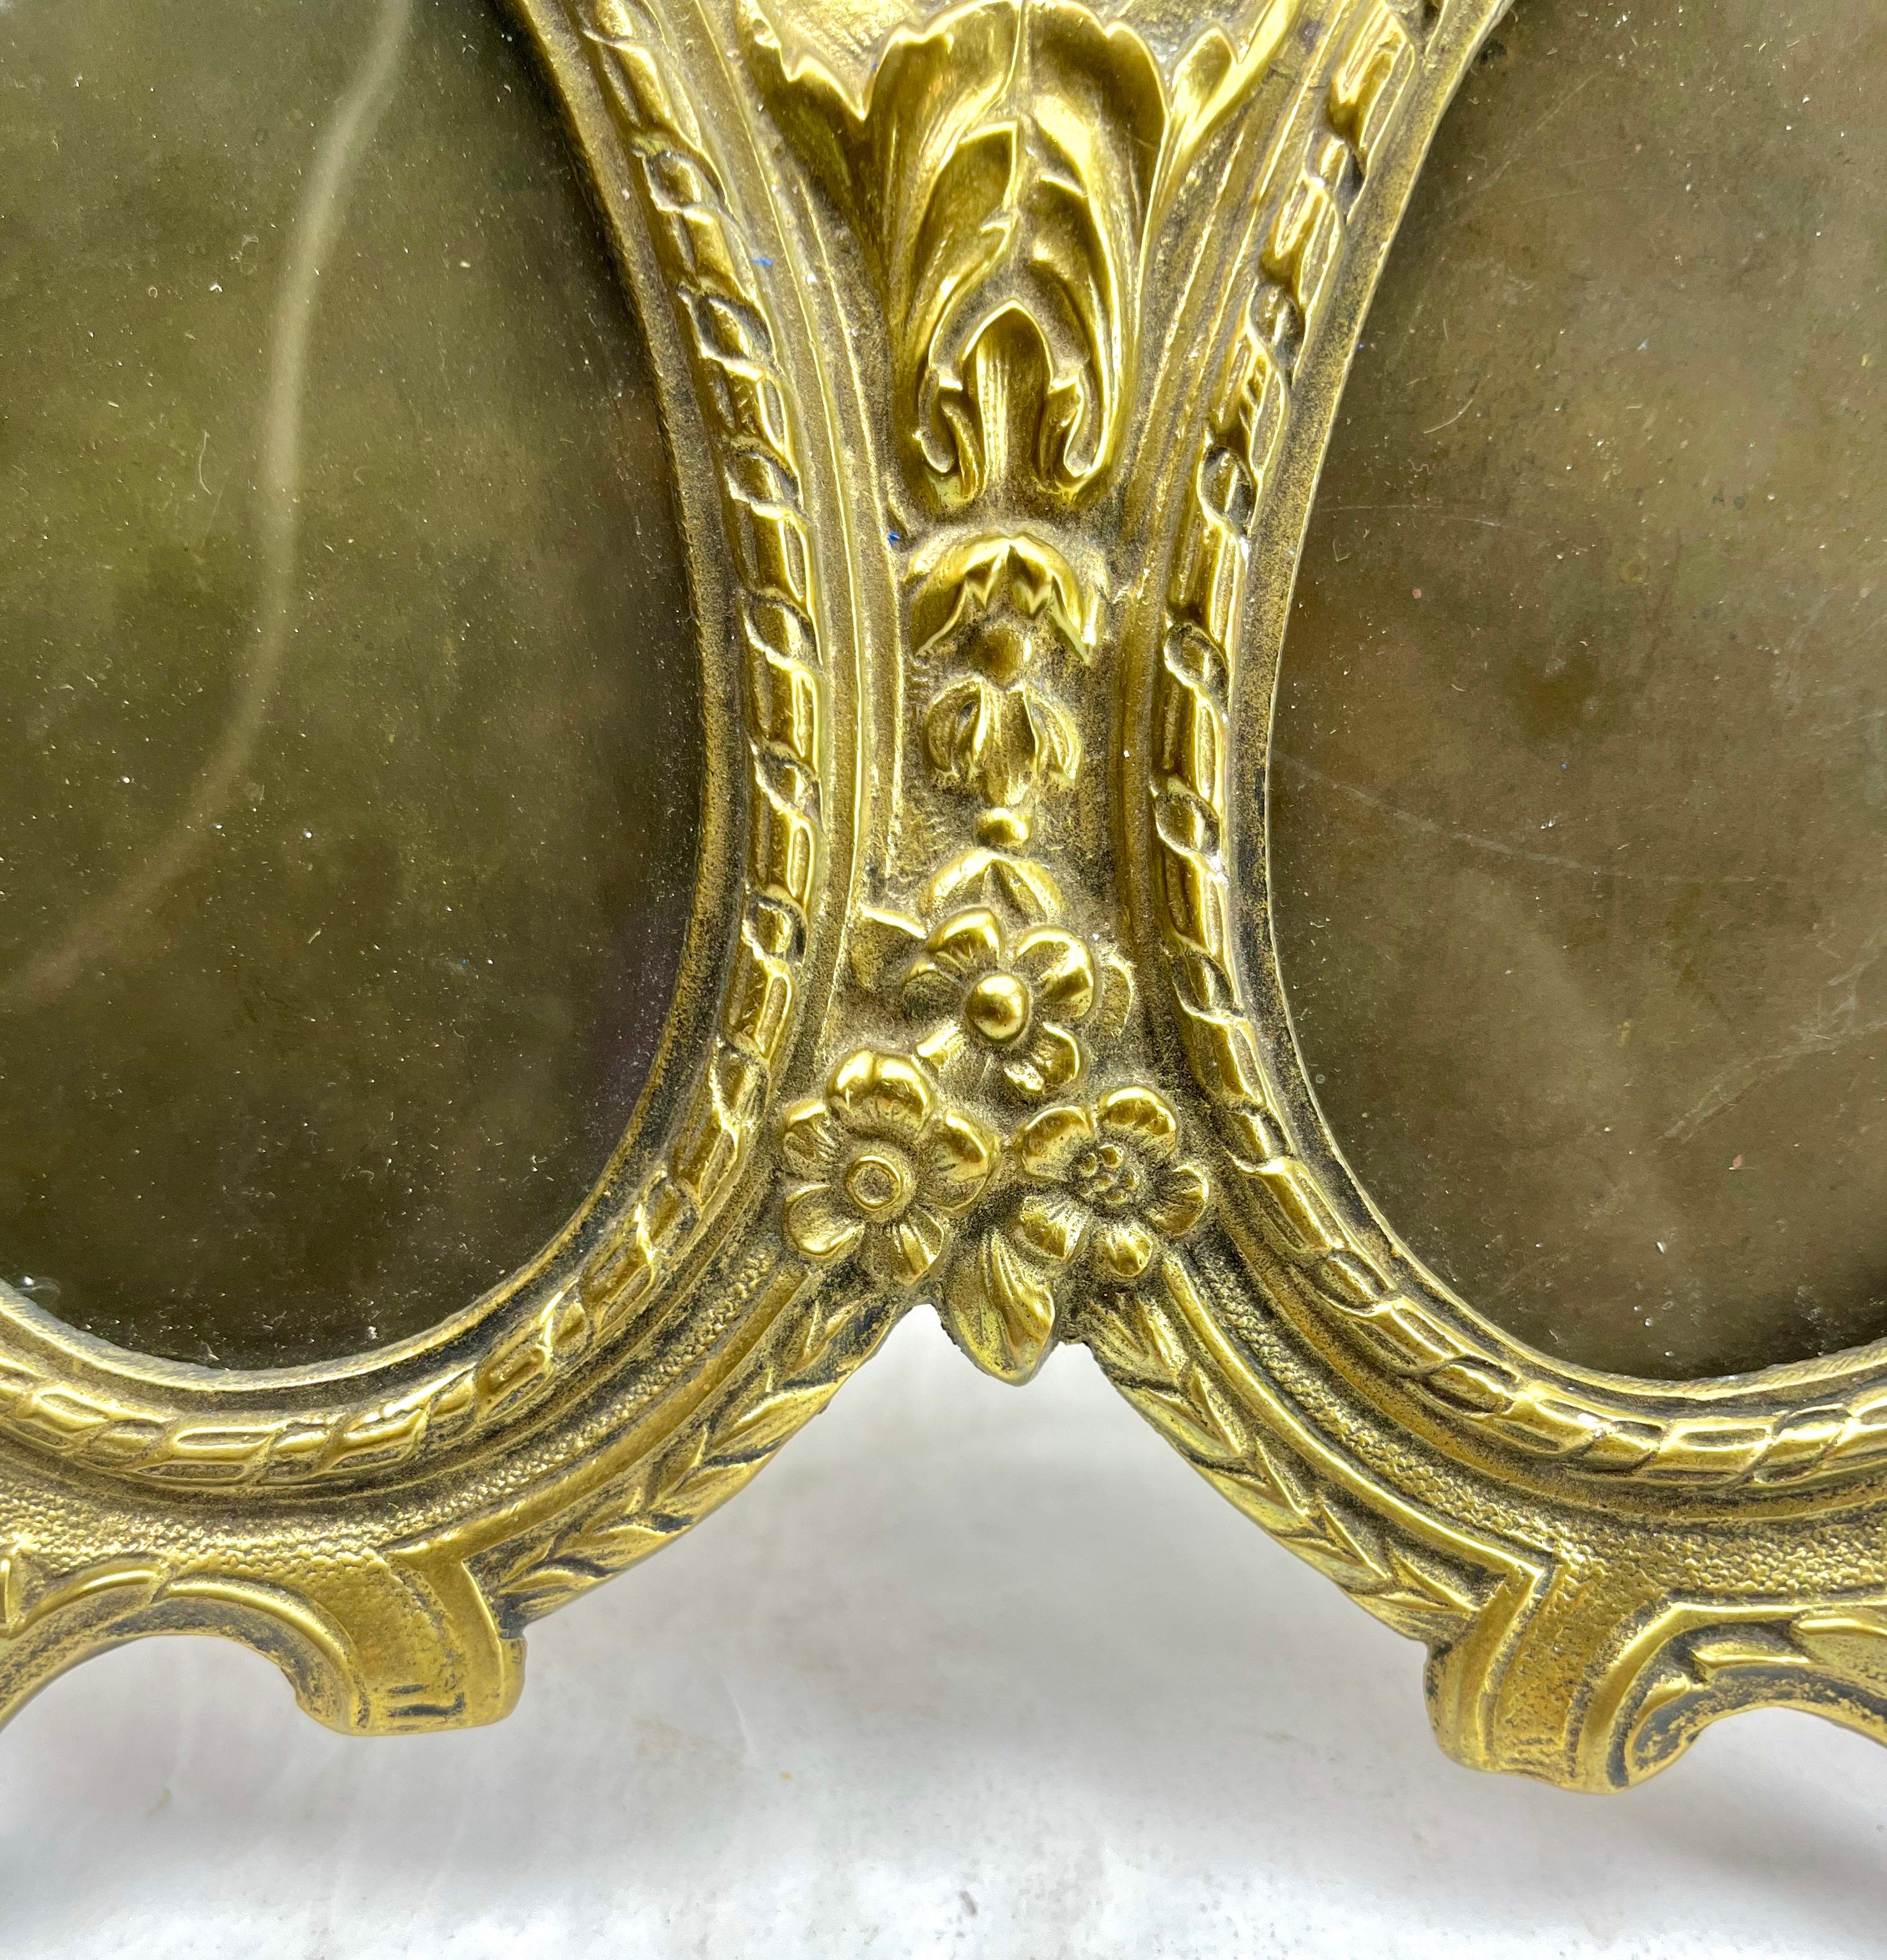 Original Victorian period double photograph frame (or miniature frame) with classical Victorian 'Lover's Knot' design. Typical frame for wedding photographs. Made of solid cast brass with a highly polished front surface.
Framed space for two